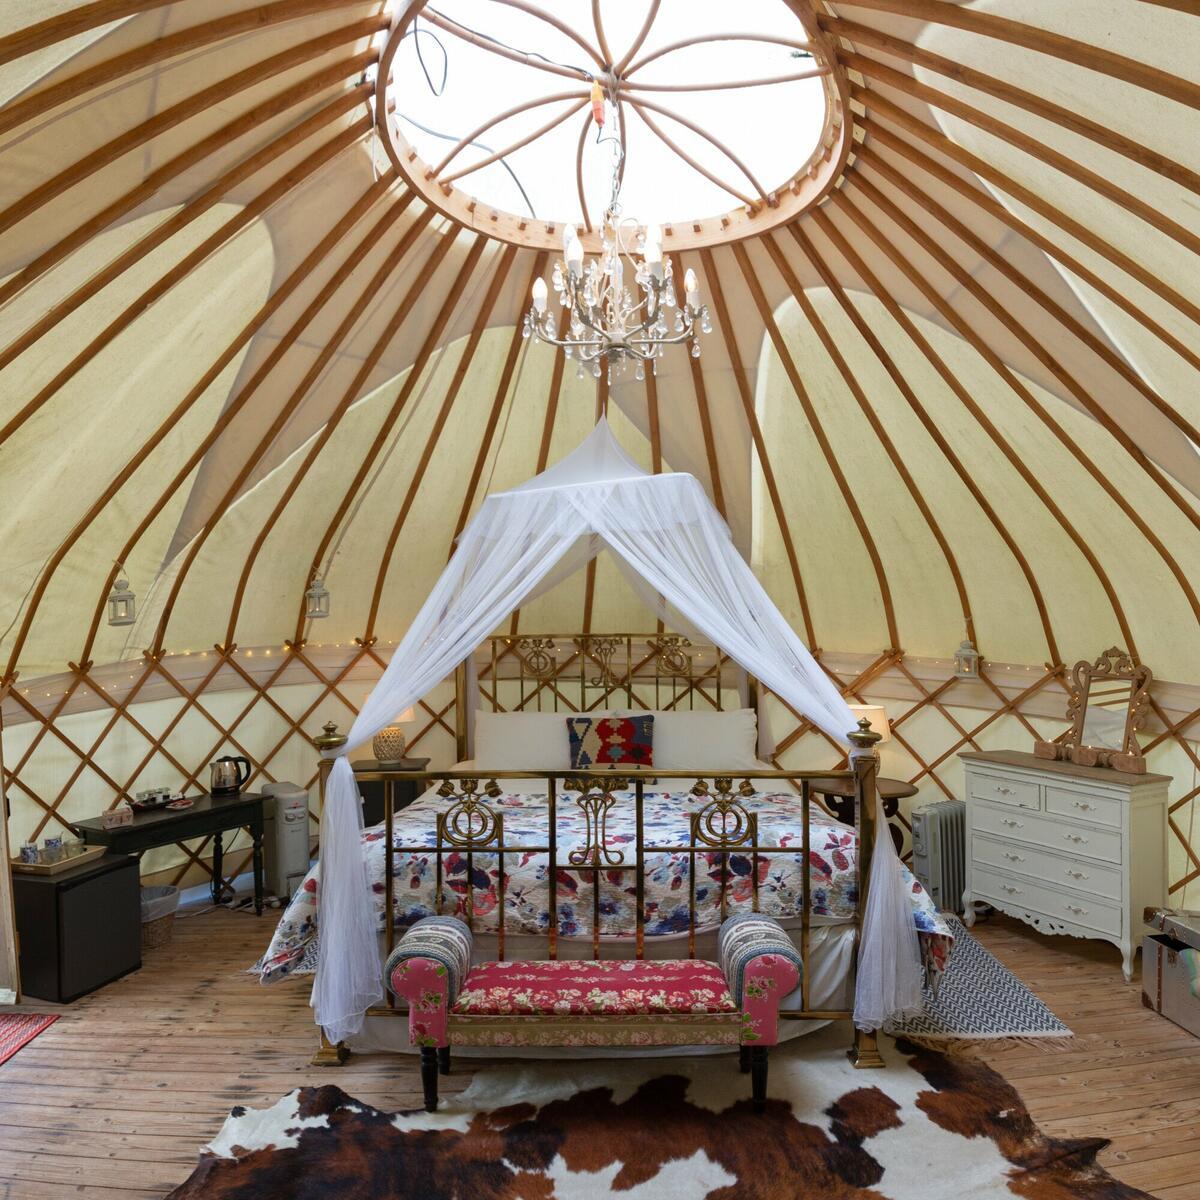 Glamping available at only 2 minutes walk from the Bridge Inn contact Glyn to 07875023397